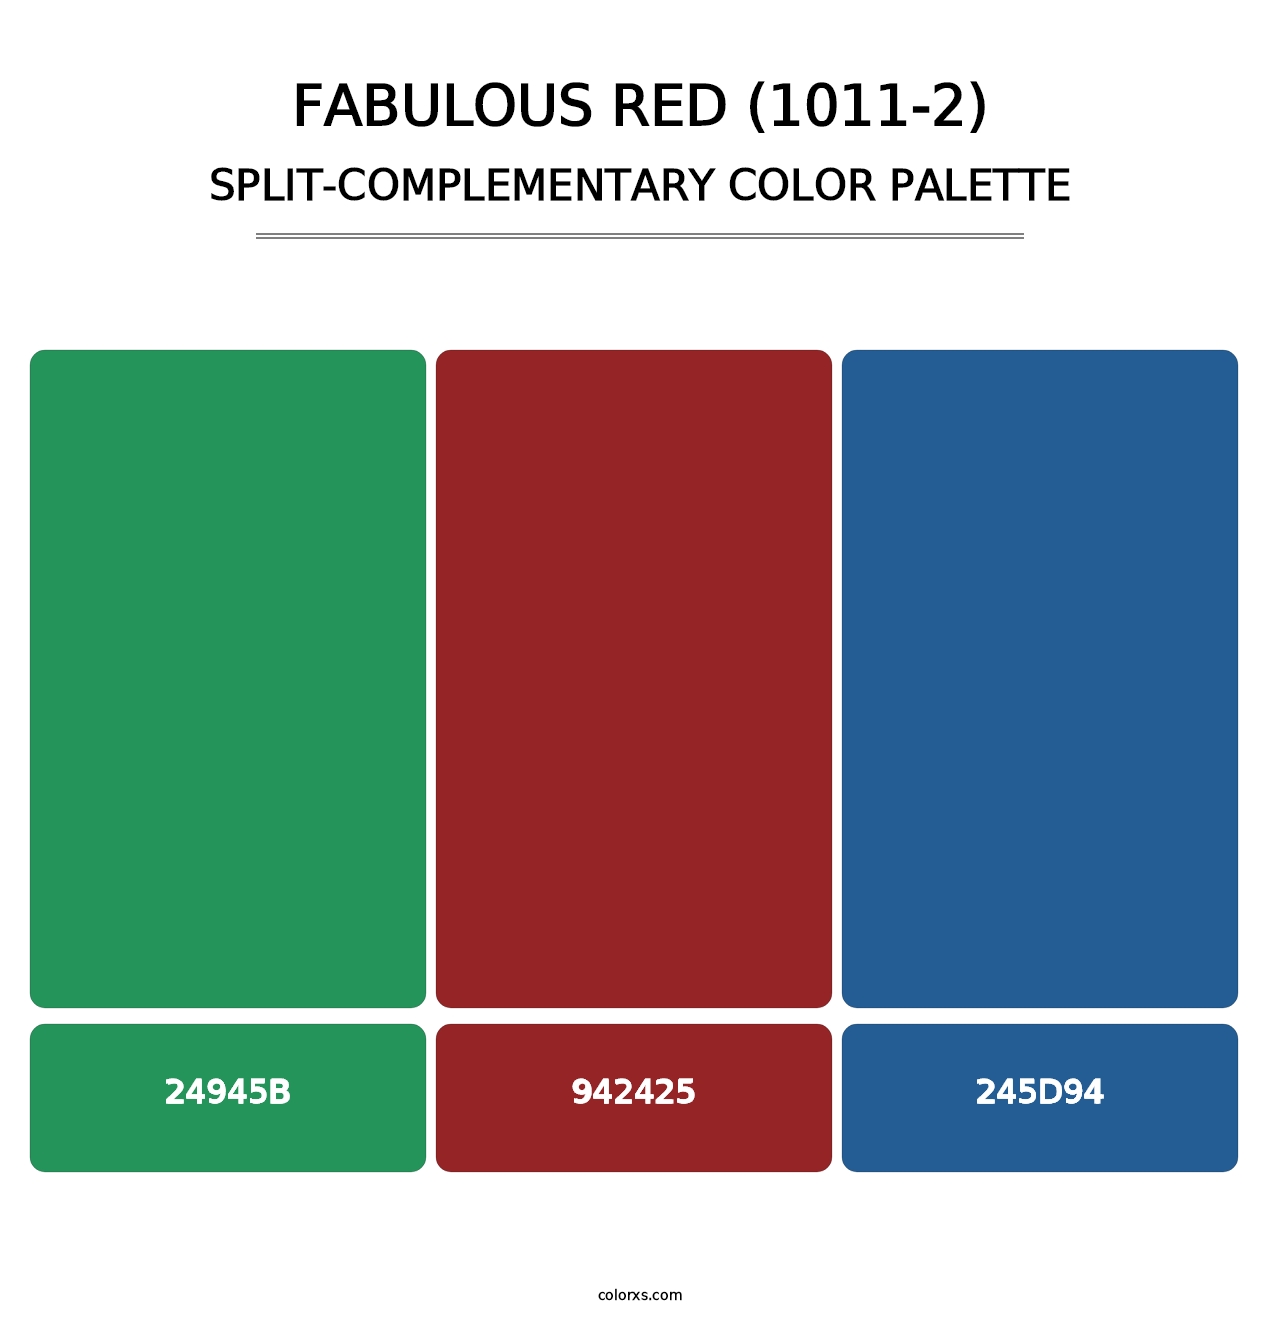 Fabulous Red (1011-2) - Split-Complementary Color Palette